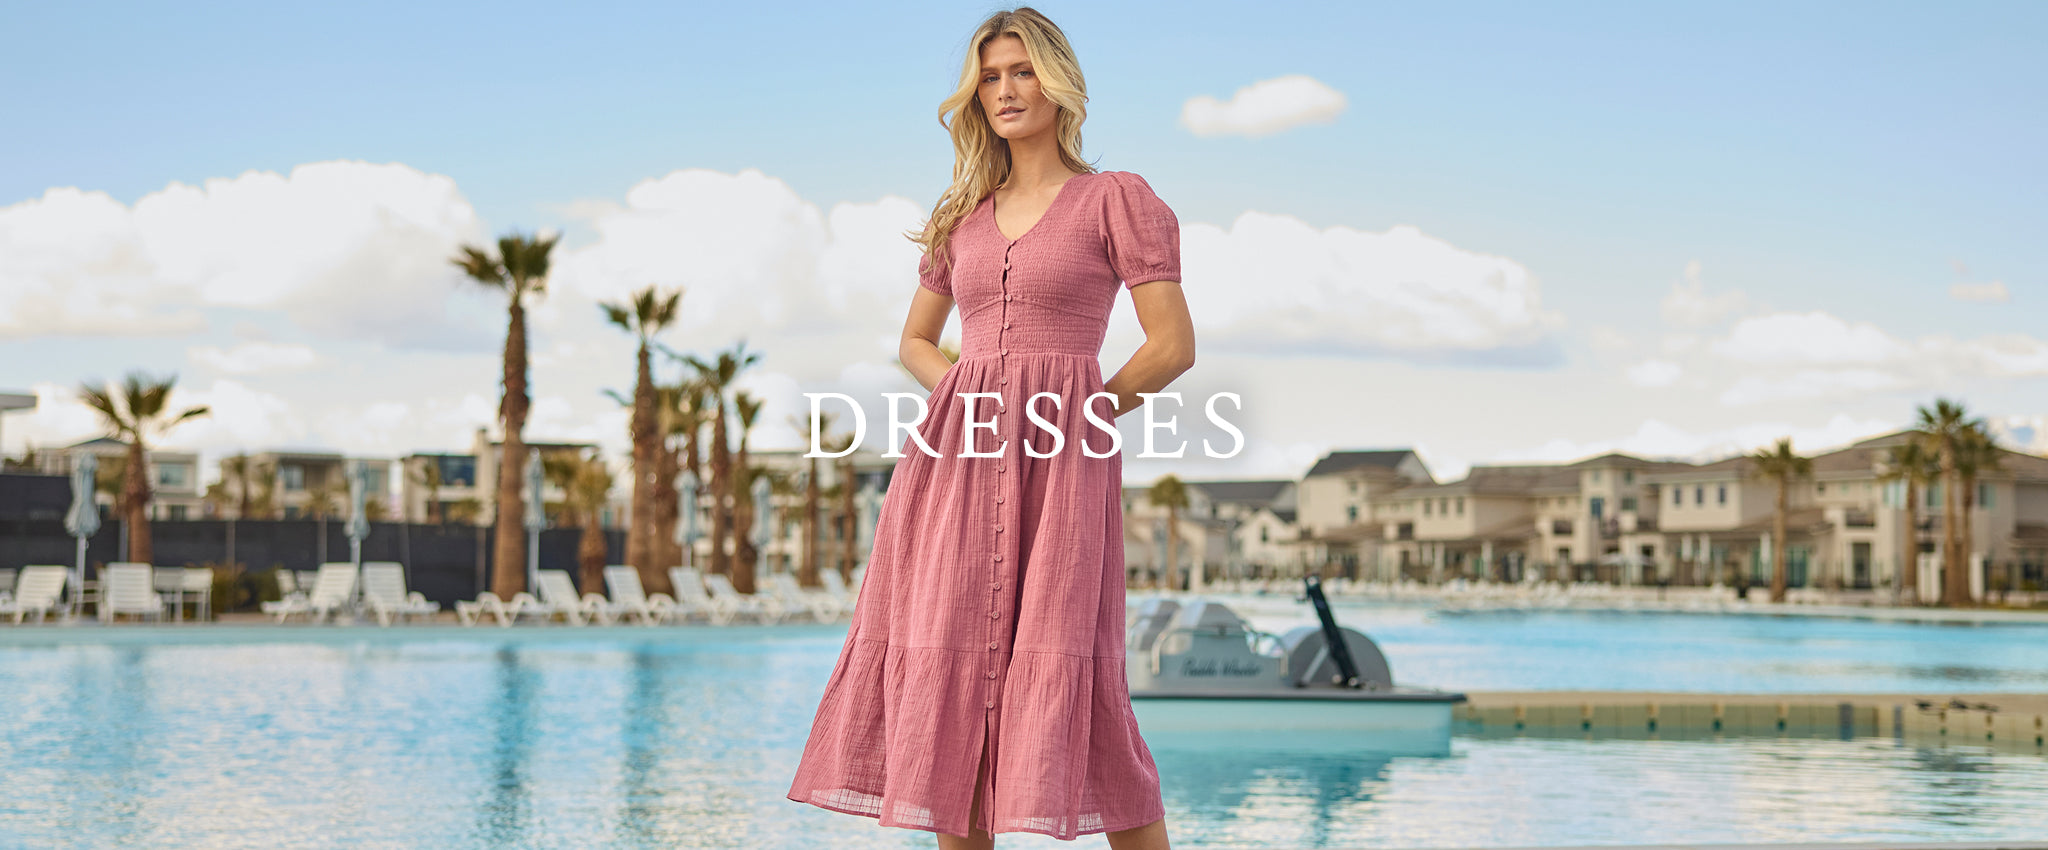 Woman by pool in a pink dress. Shop dresses.